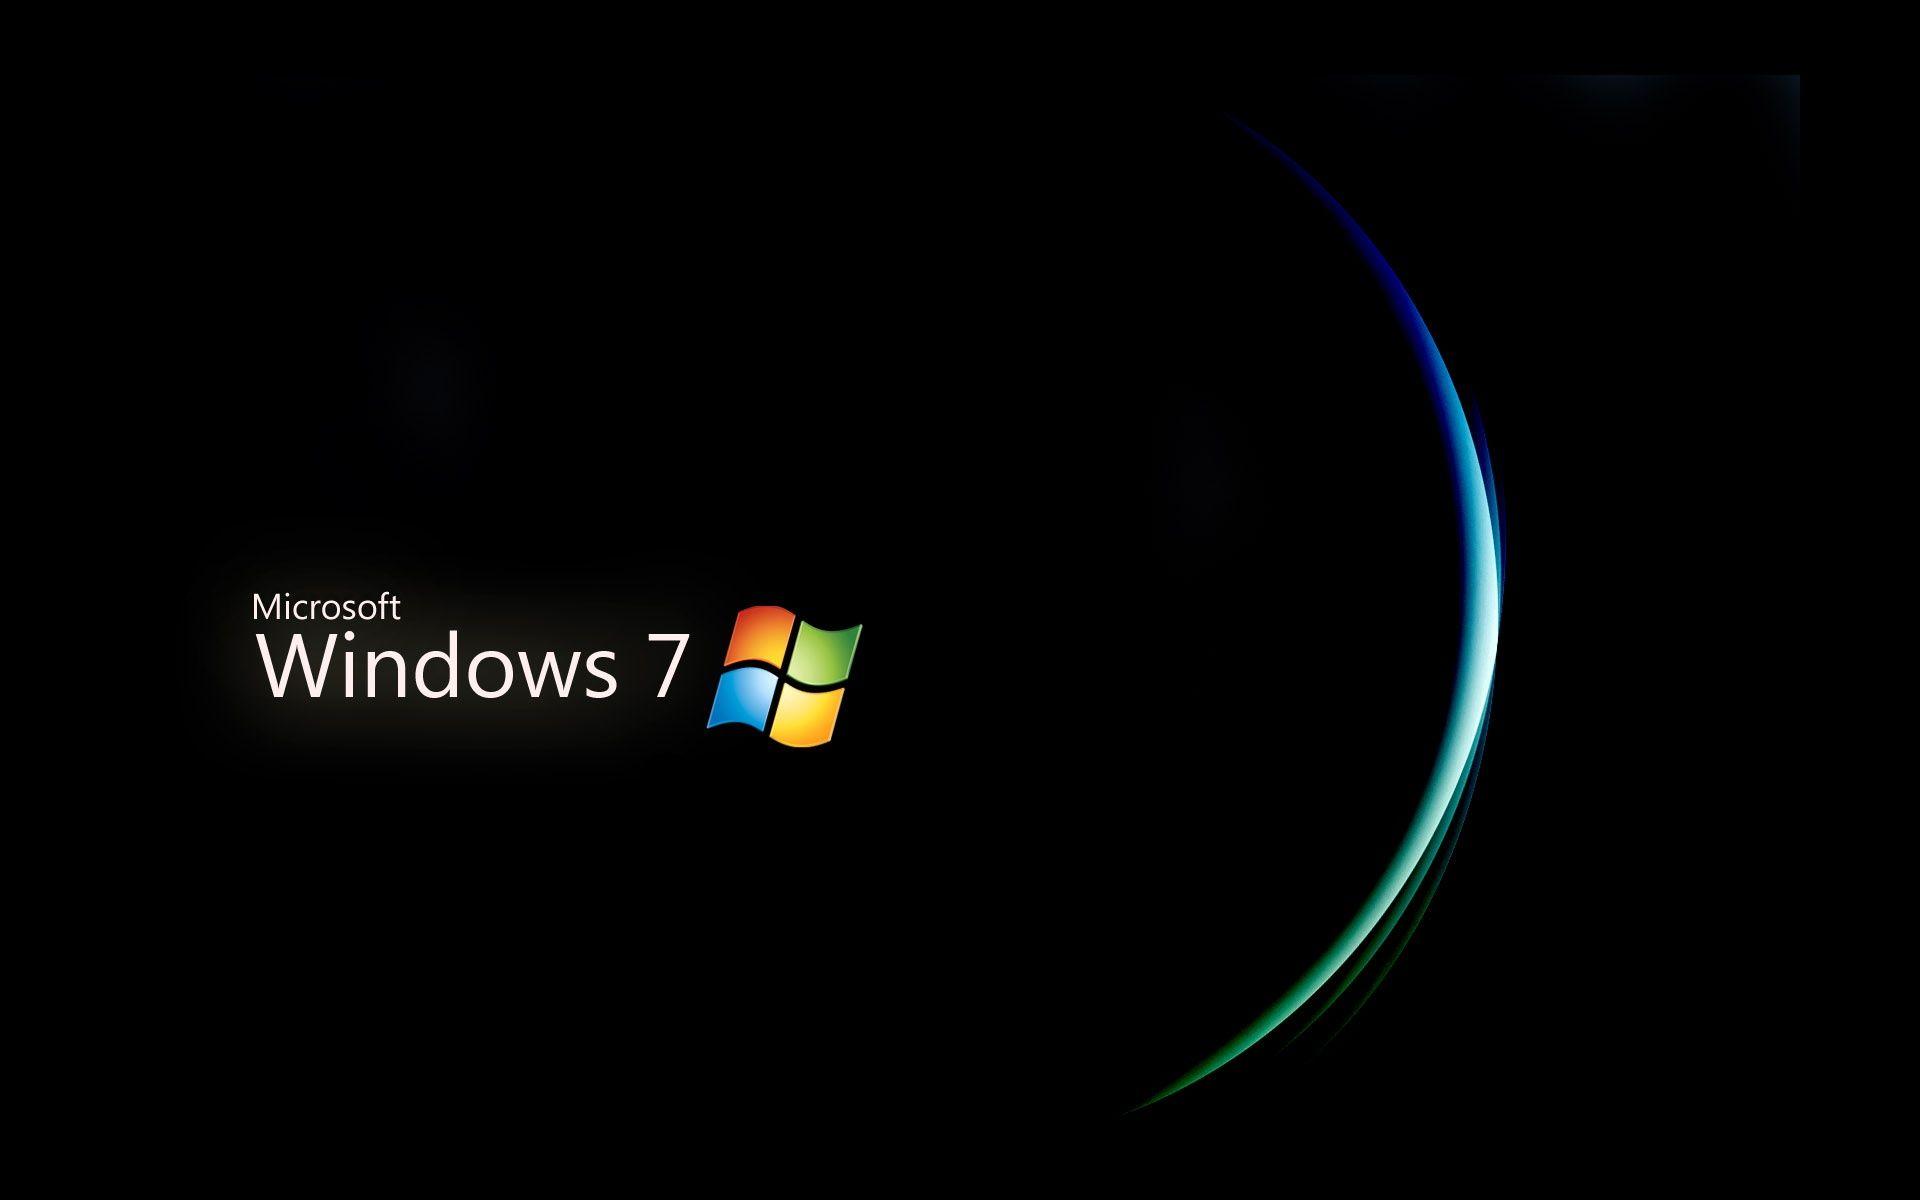 Wallpaper For > Cool Windows 7 Background